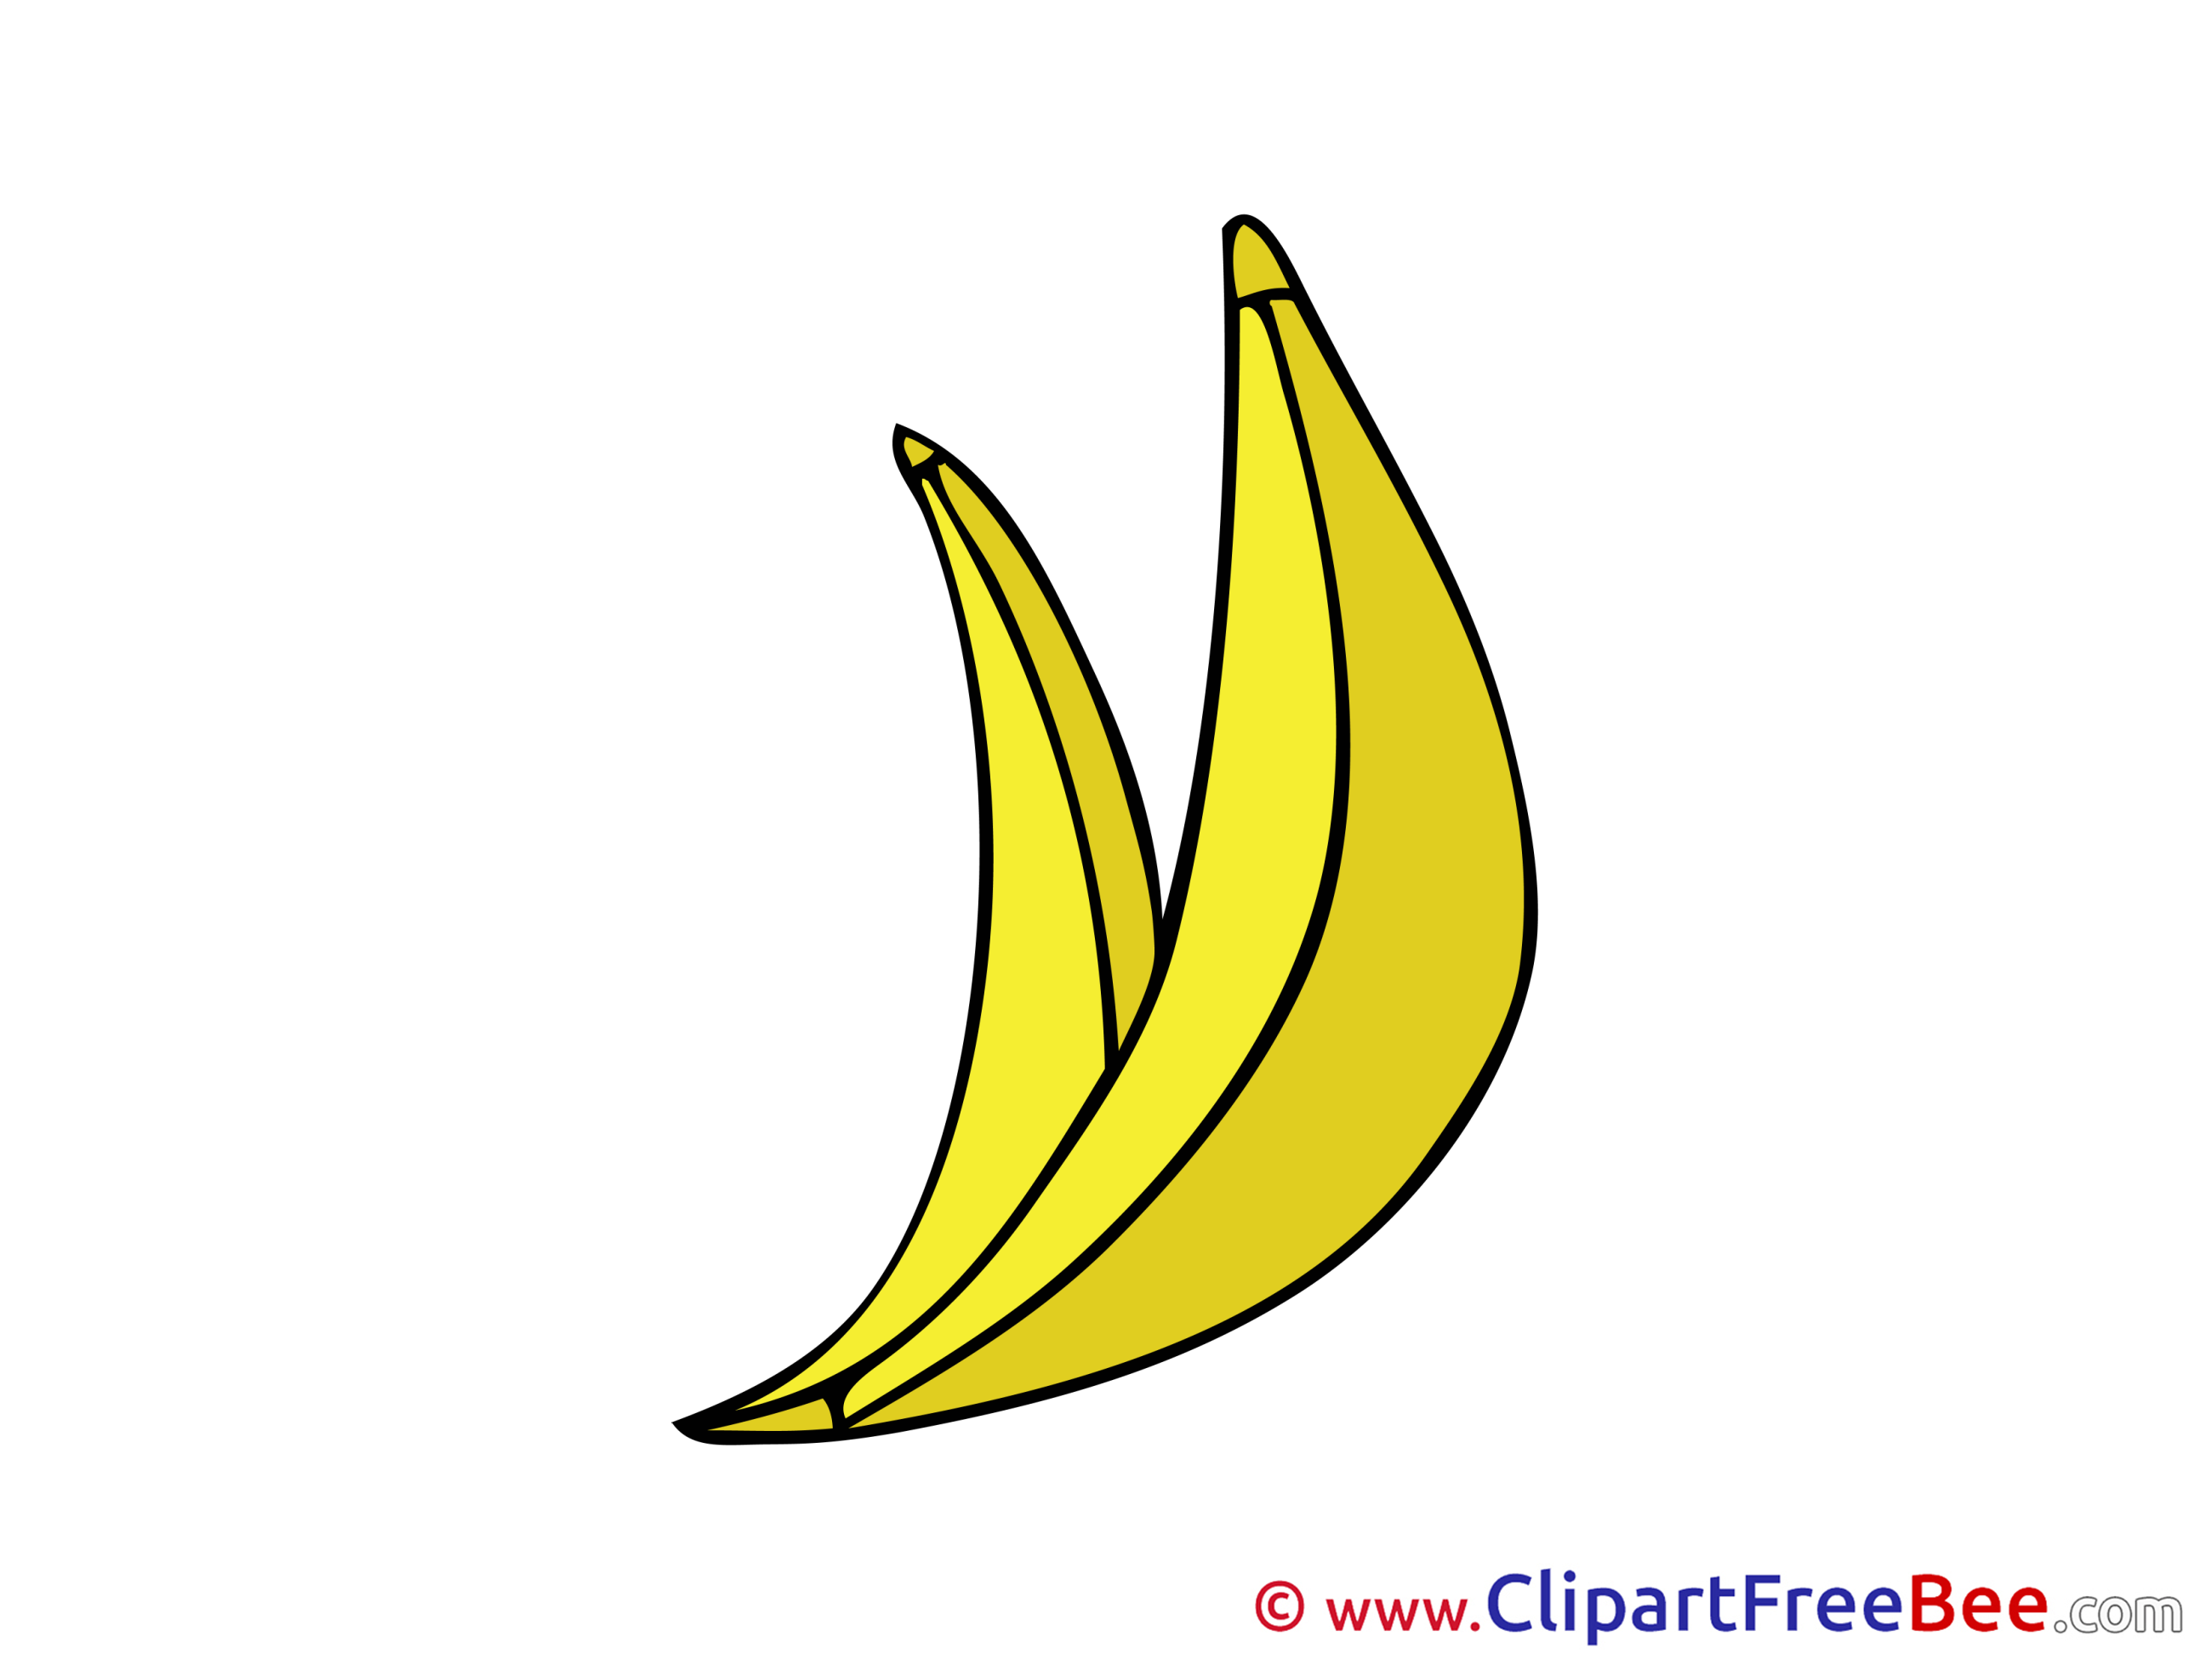 Bananas printable Images for download